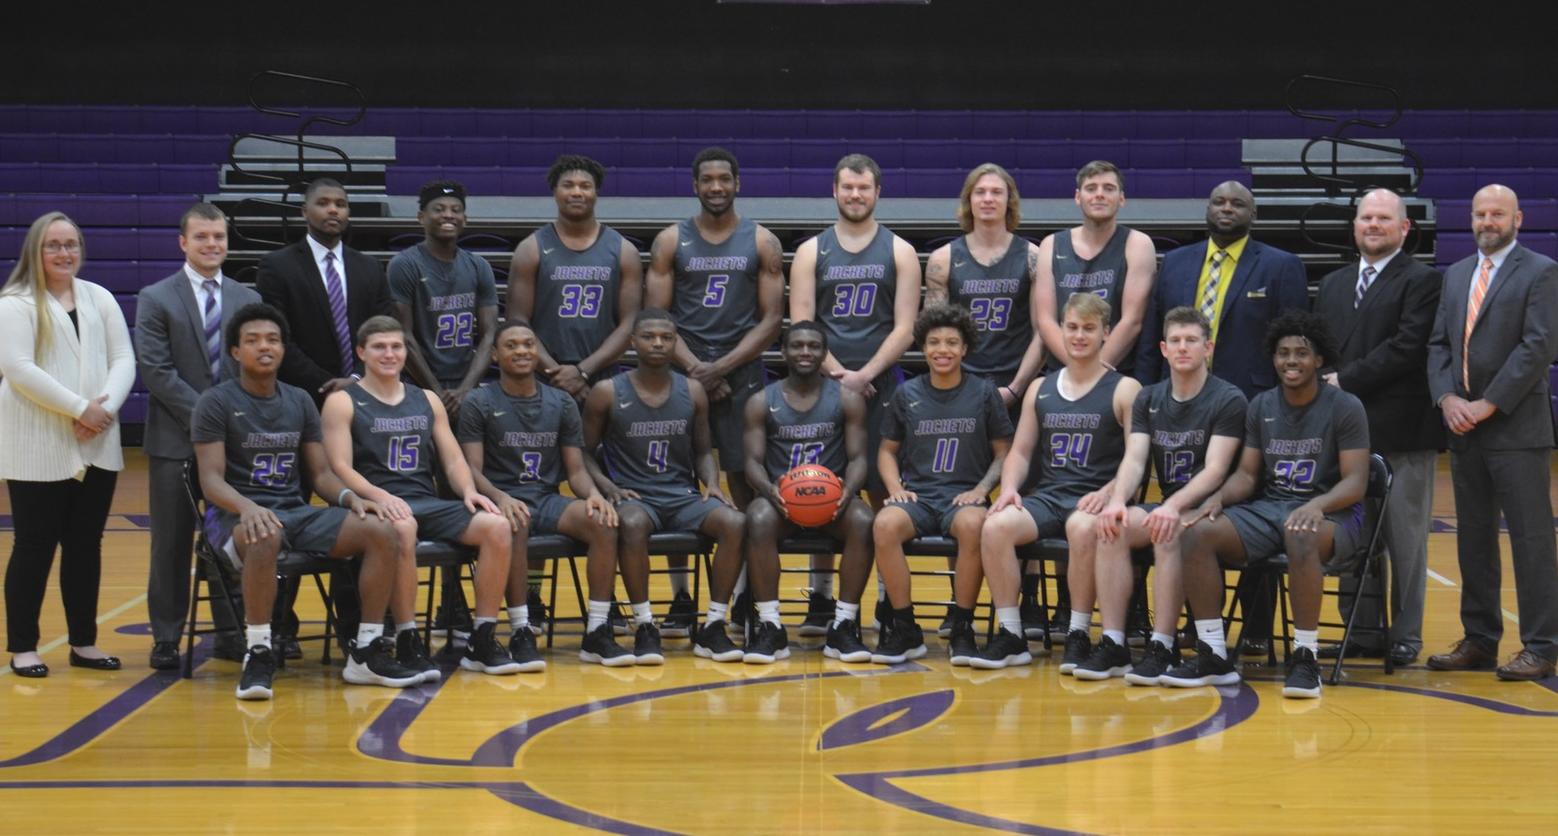 Defiance College Welcomes New Faces for the 2018-19 Season